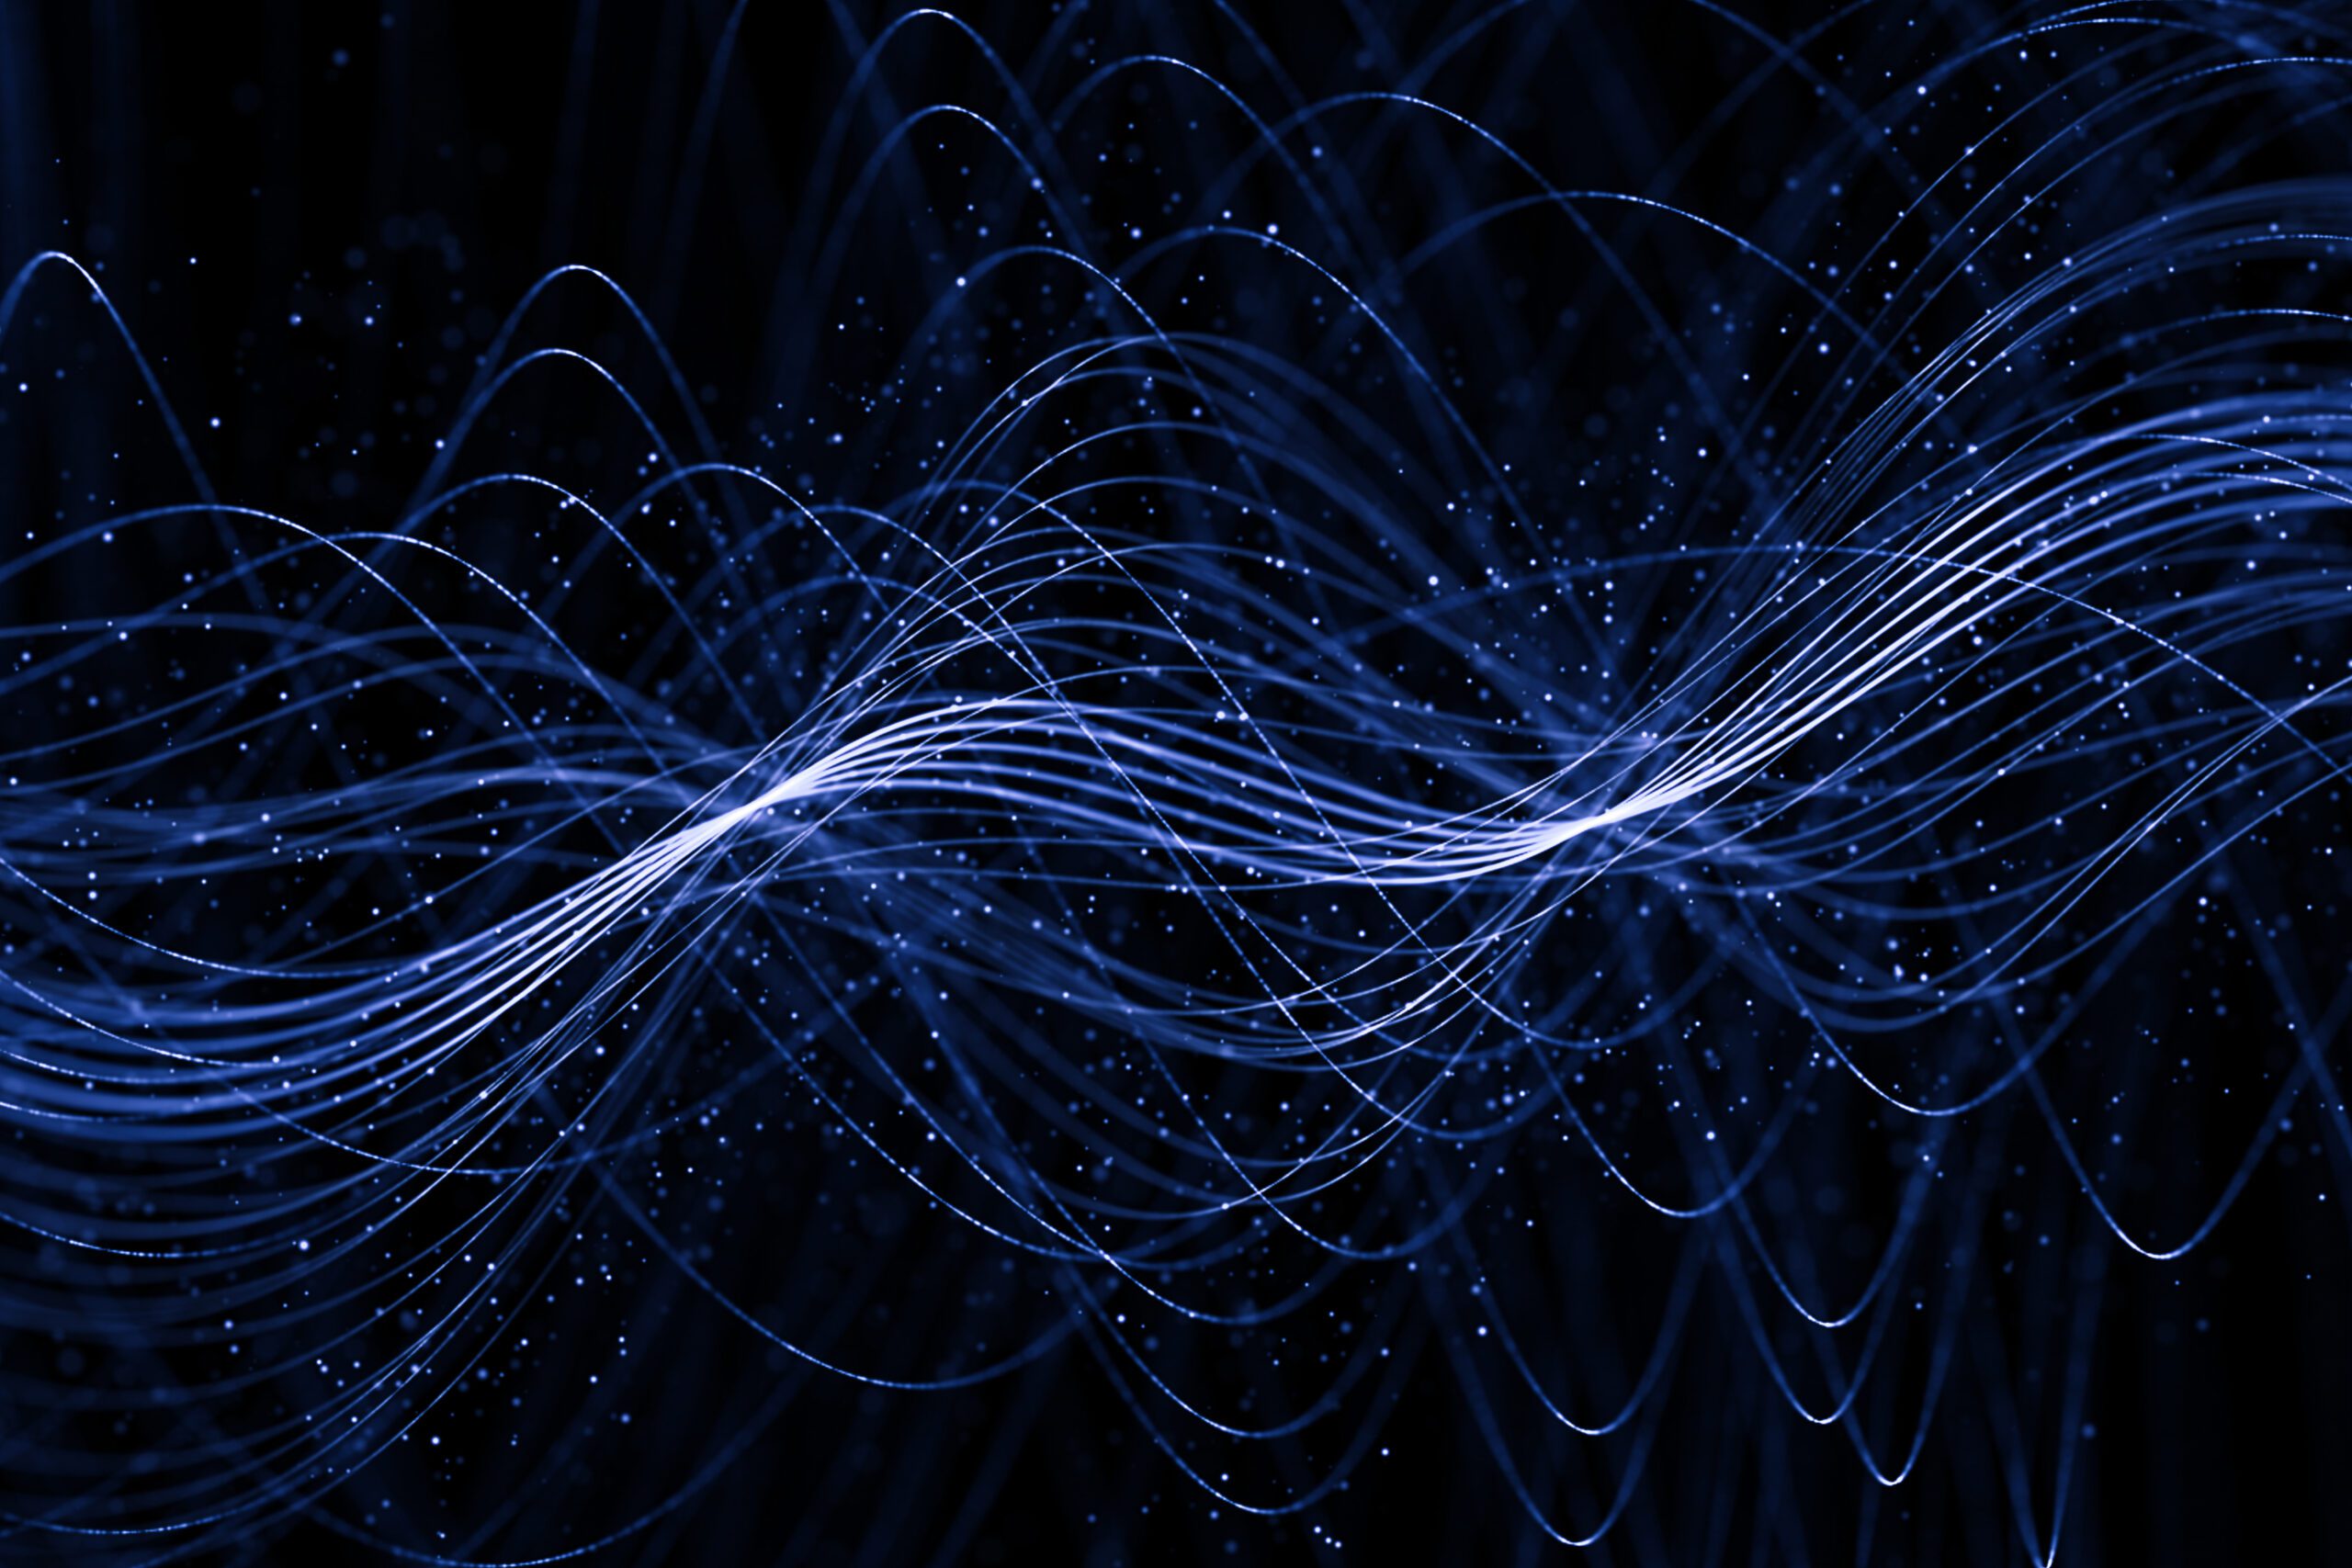 Image of a photon. Blue wavy lines on a black background.